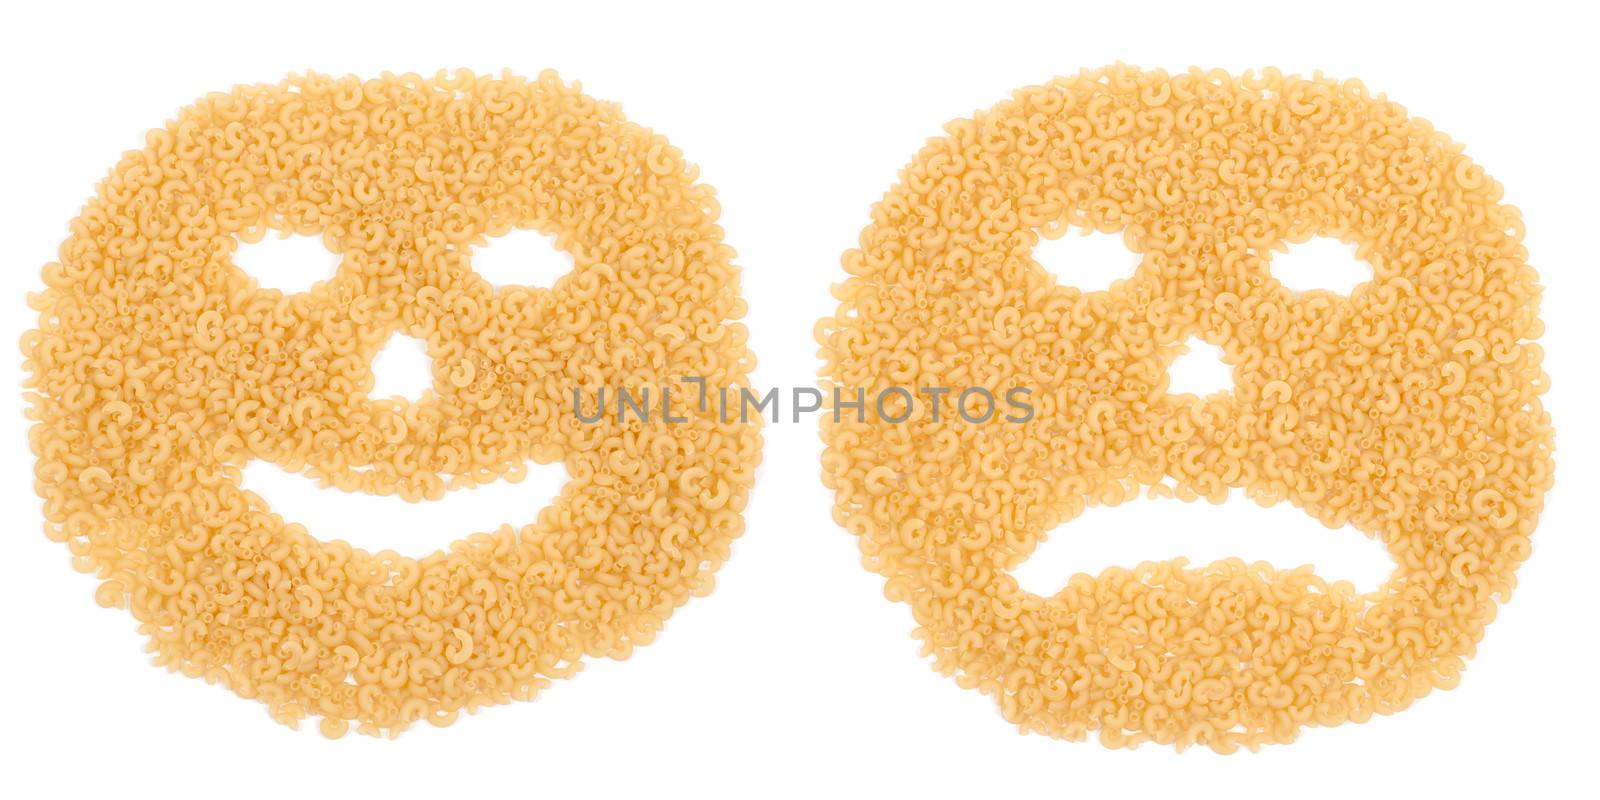 attractives smiling and crying pasta by mycola